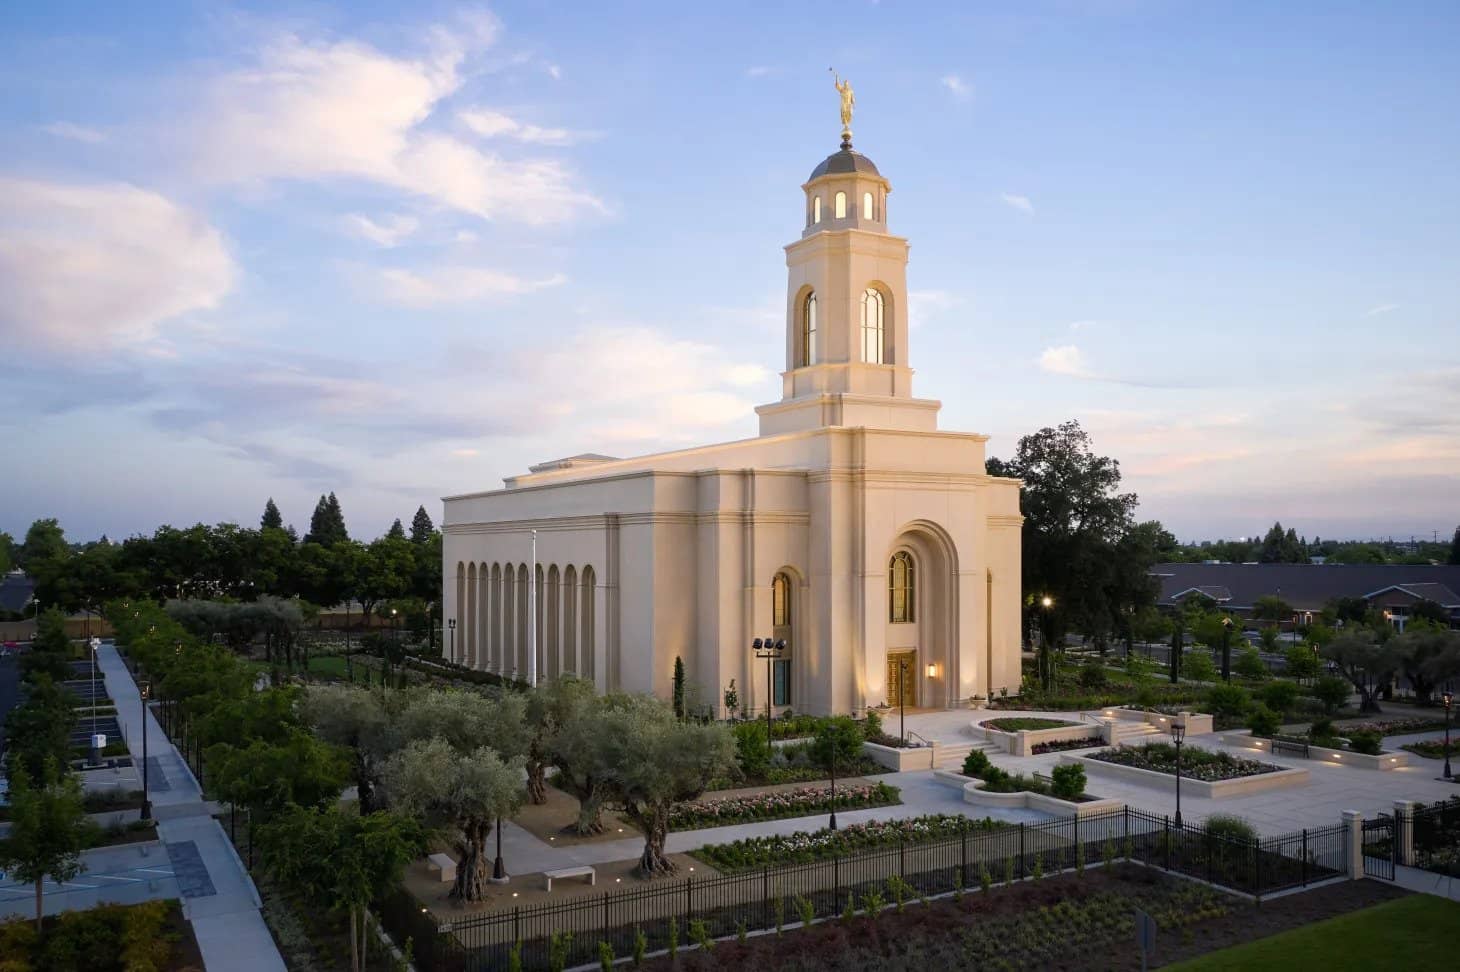 The exterior of the Feather River California Temple, a white building with a center spire near the front.